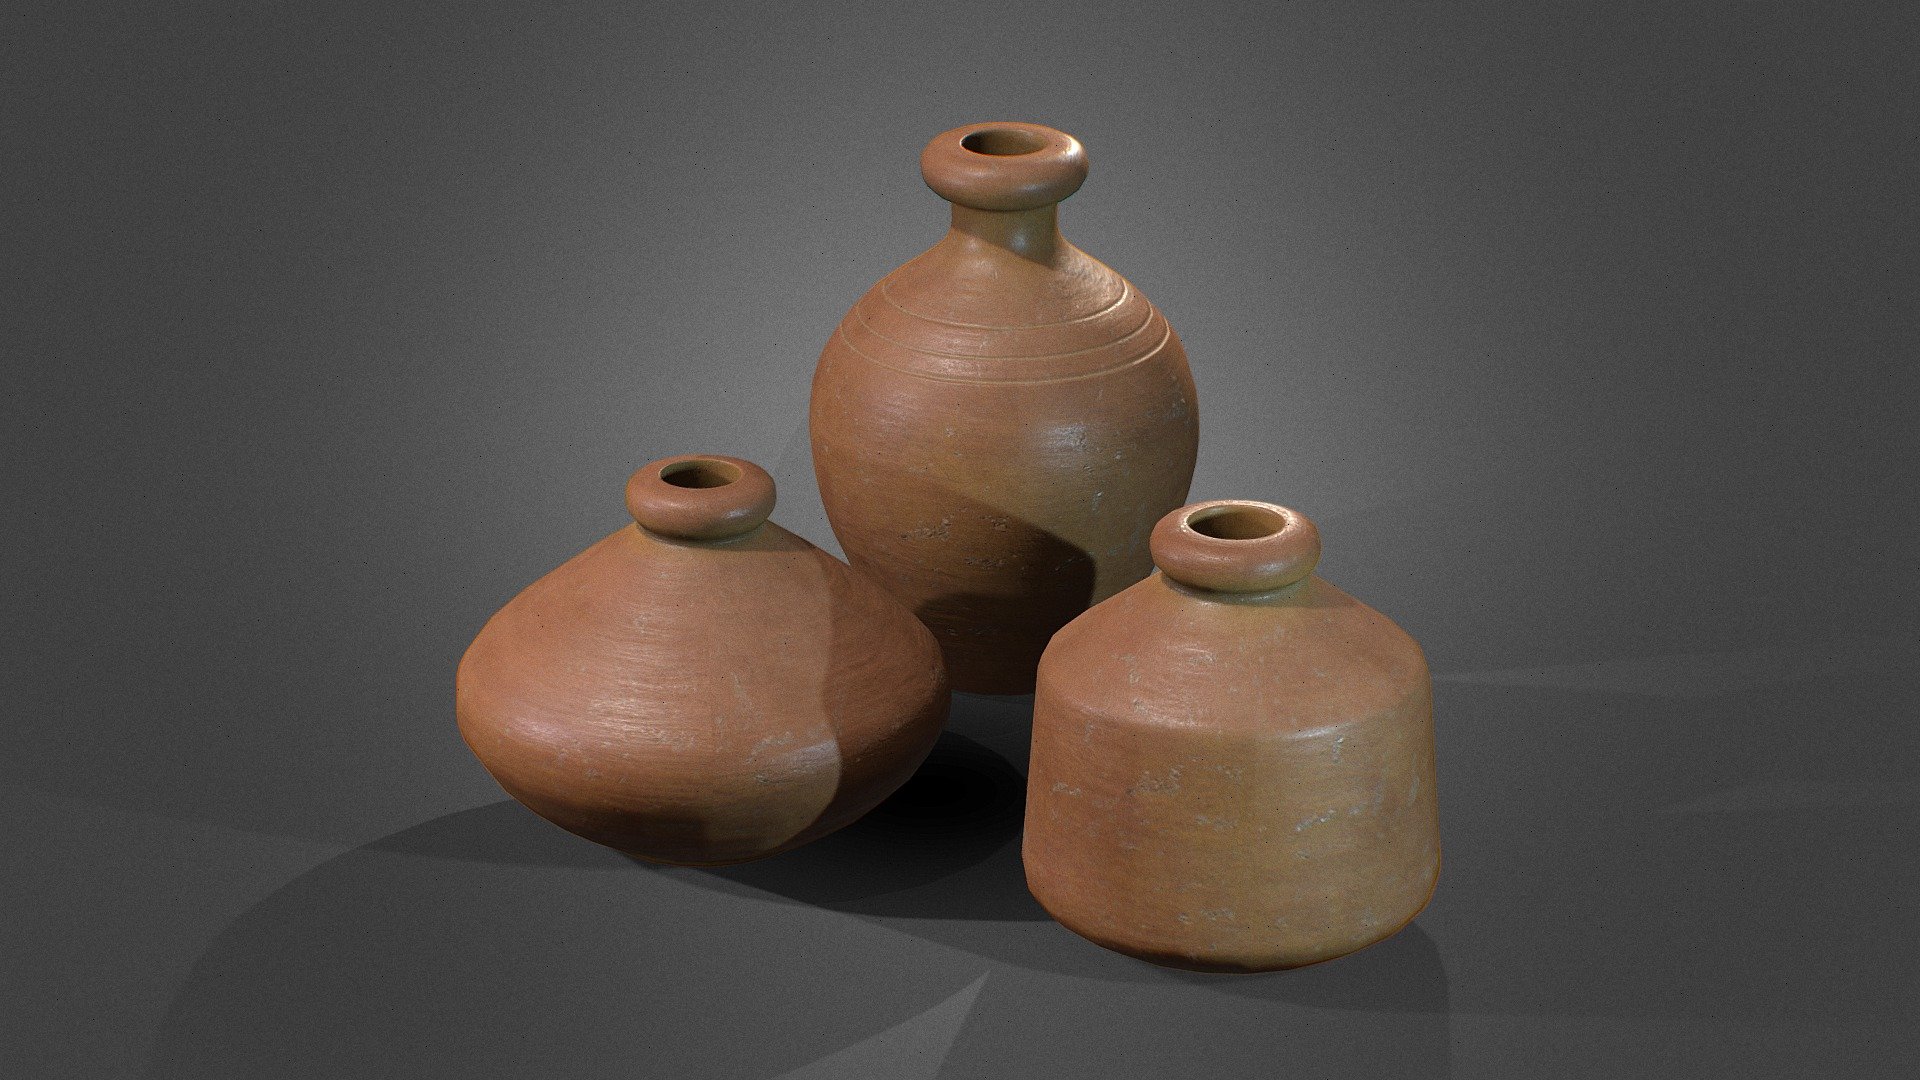 This is a 3d model of clay Pots for using as water container. It is can be used as assets for games and other store markets renders.

This model is created in 3ds Max and textured in Substance Painter.

This model is made in real proportions.

High quality of textures are available to download.

Maps include - Base Color, Normal, AO and Roughness Textures 3d model